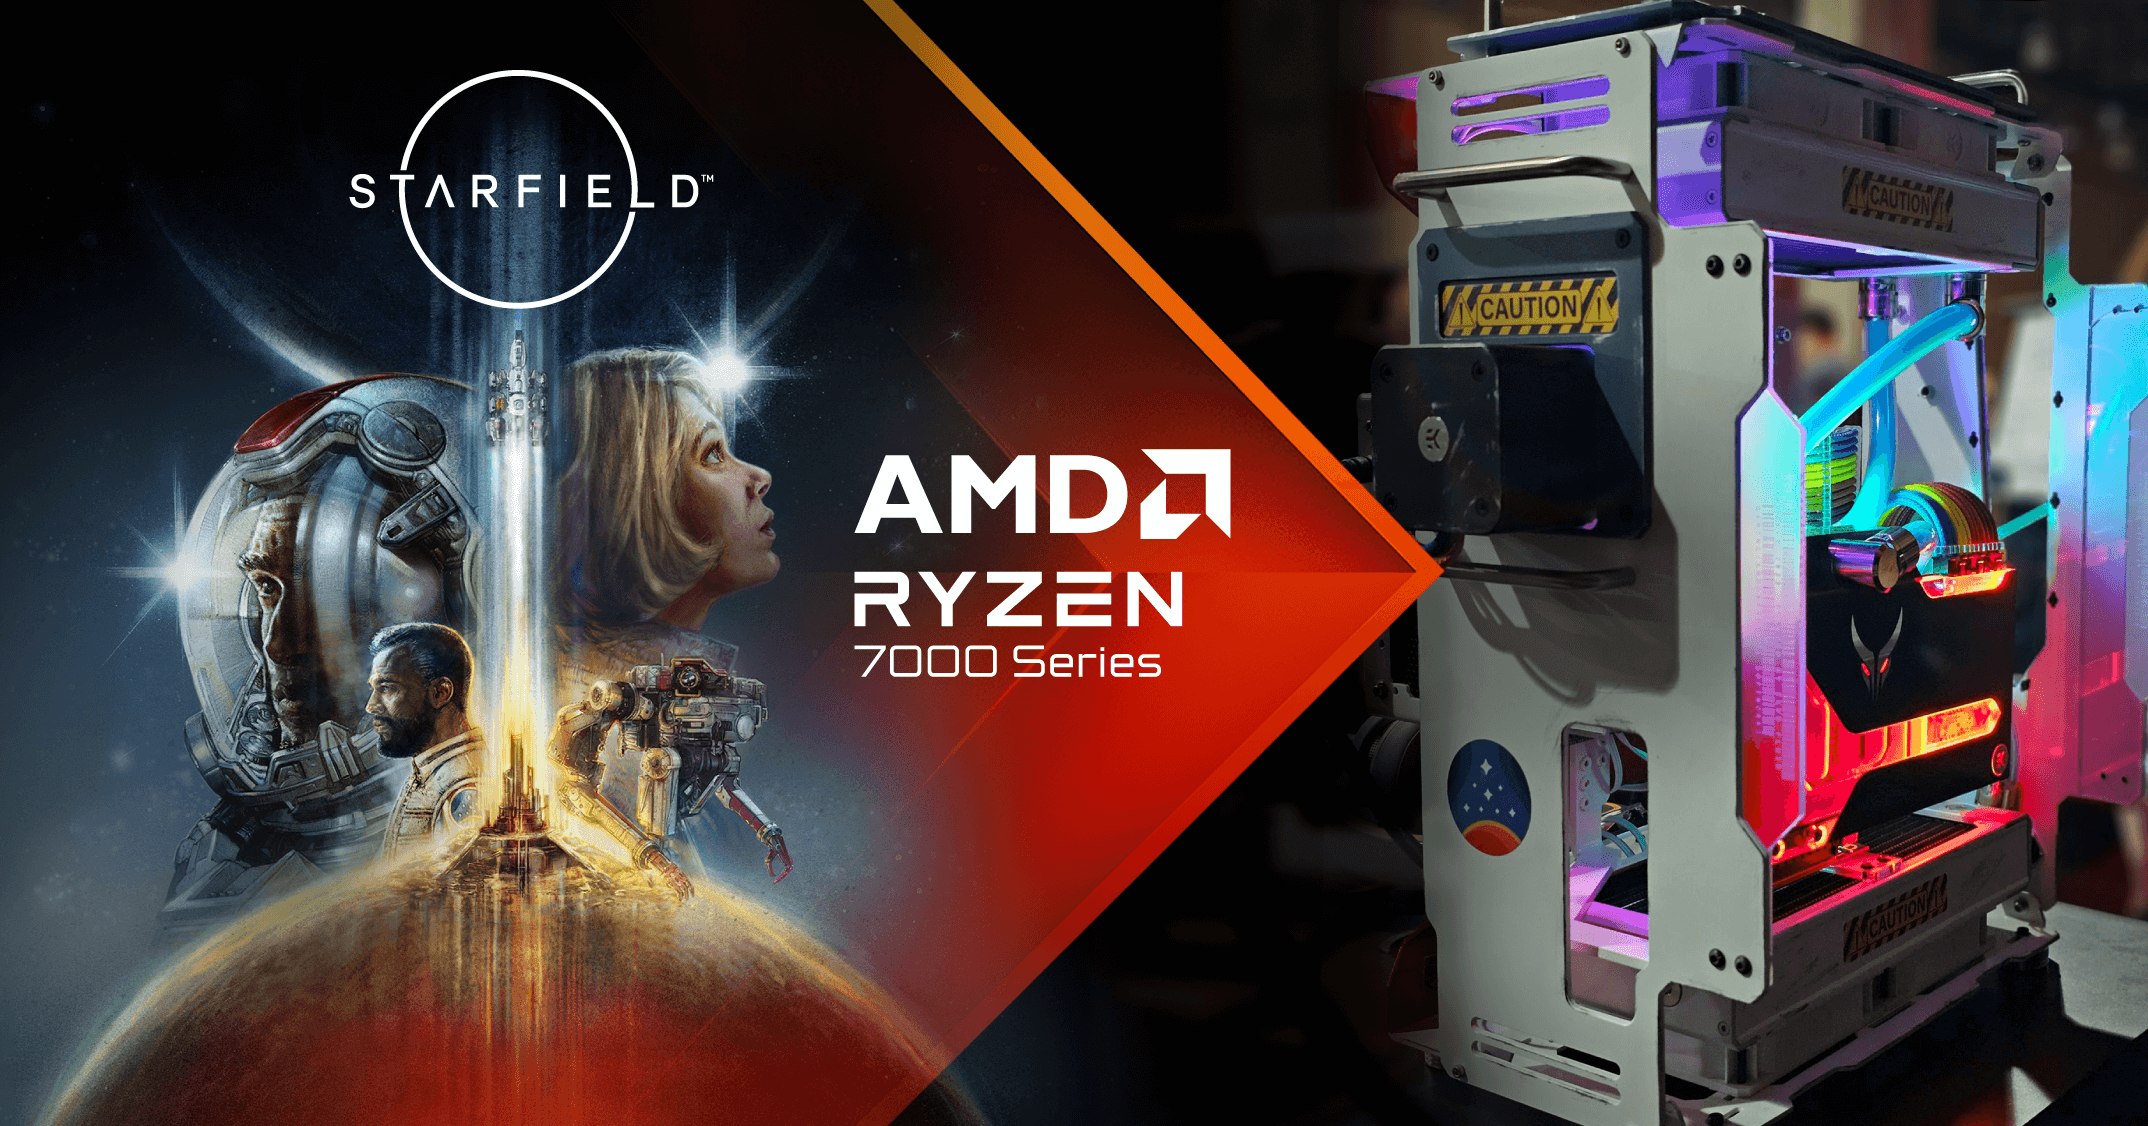 EK at PAX West 23 – Our Partner: AMD + Starfield PC